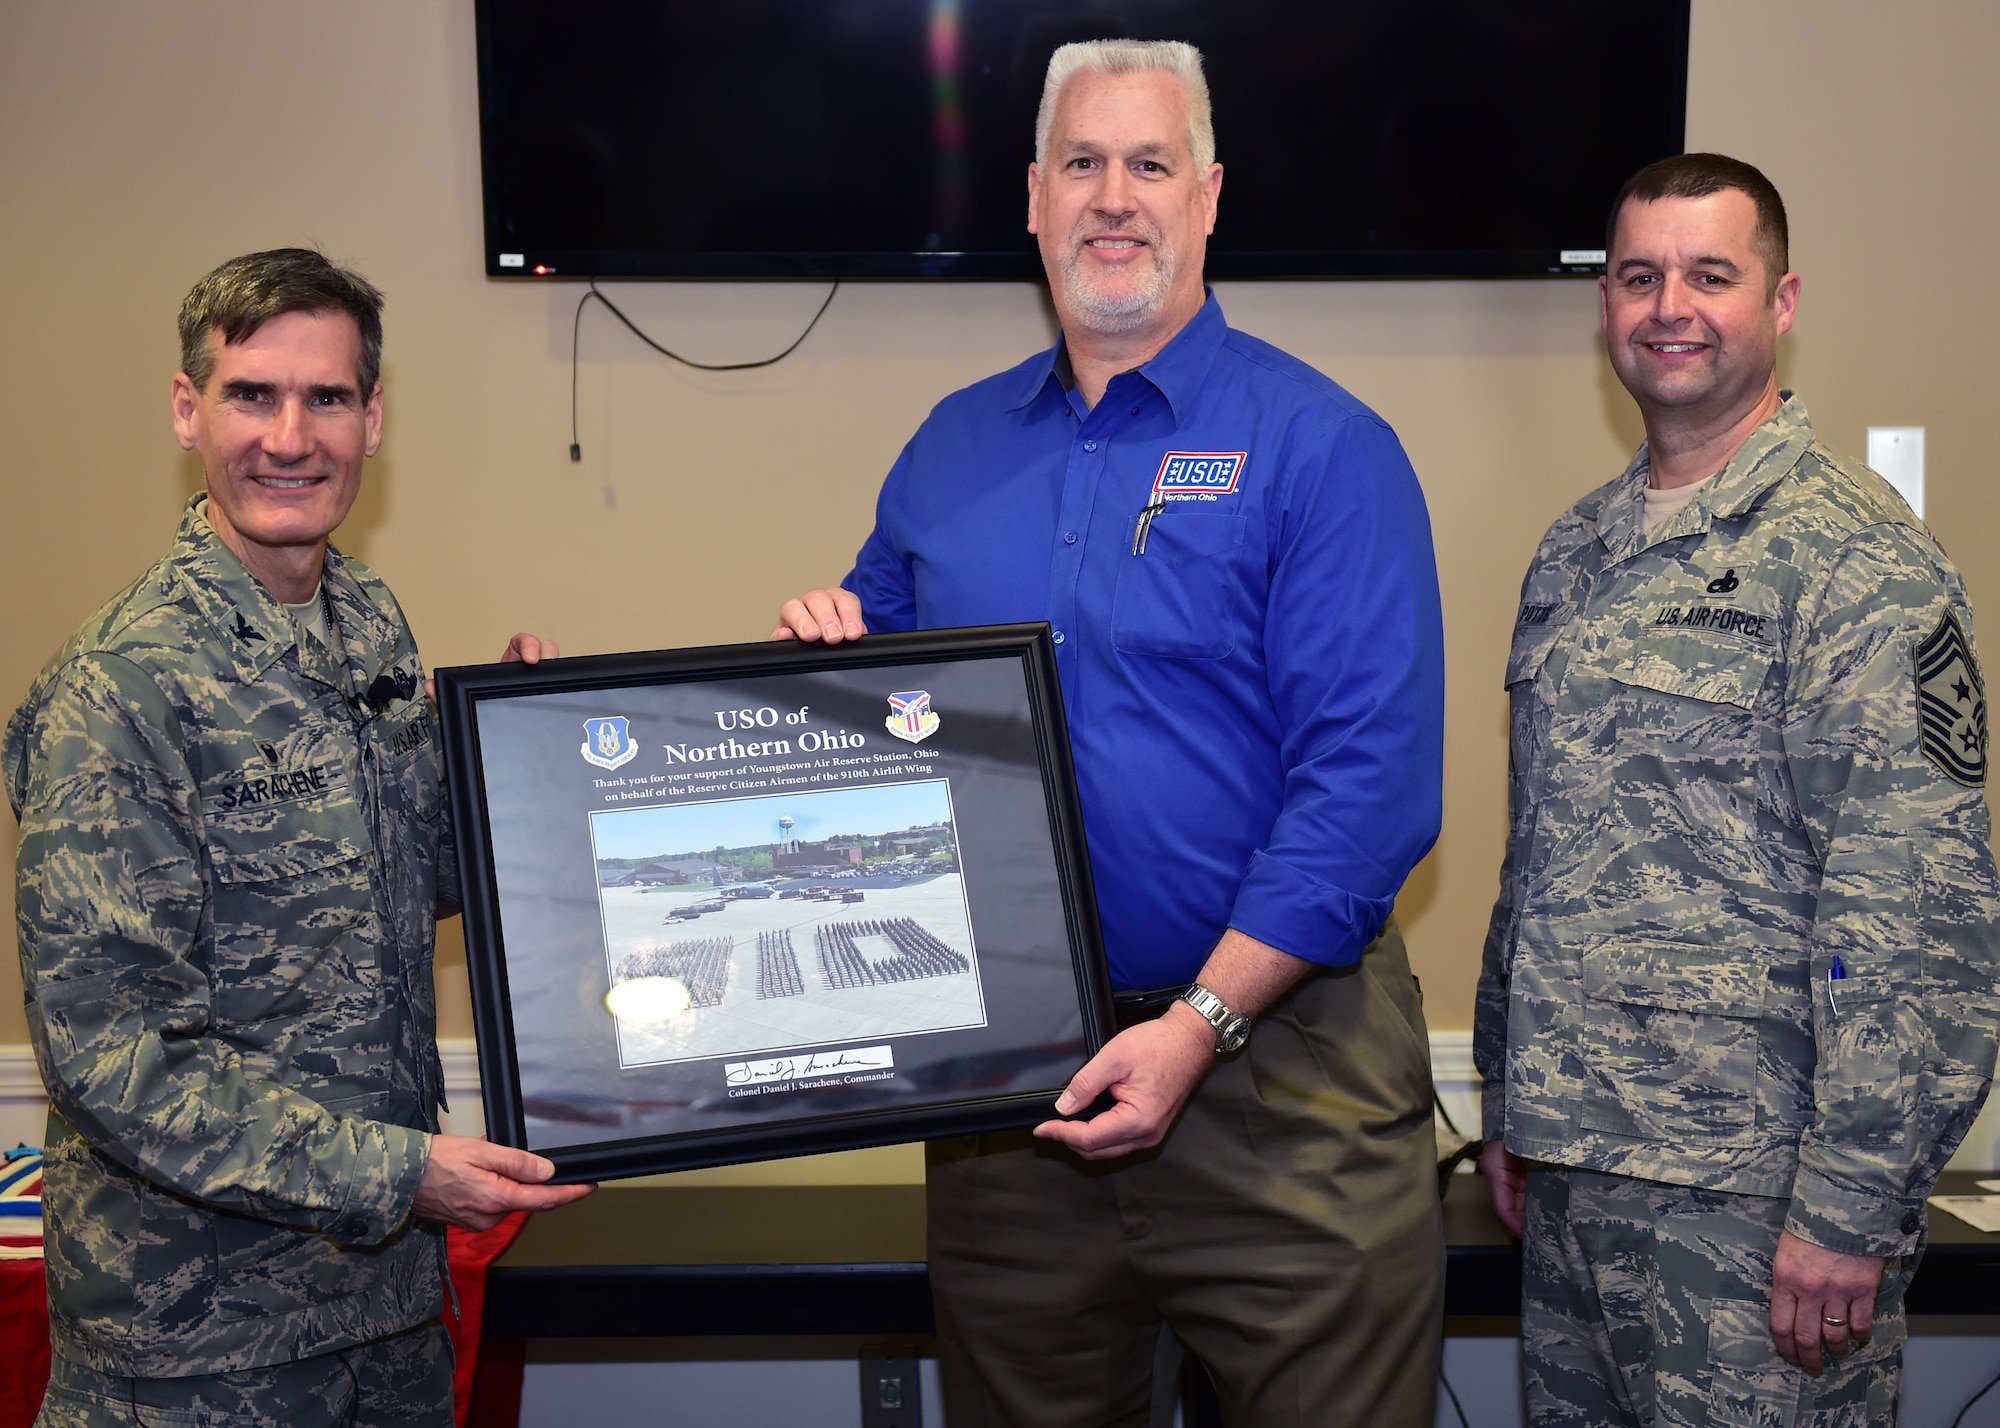 Col. Dan Sarachene, commander of the 910th Airlift Wing, and Chief Master Sgt. Robert Potts, Command Chief of the 910th Airlift Wing, present a Wing photograph to Bruce Bille, executive director of the USO of Northern Ohio, Feb. 11, 2018.